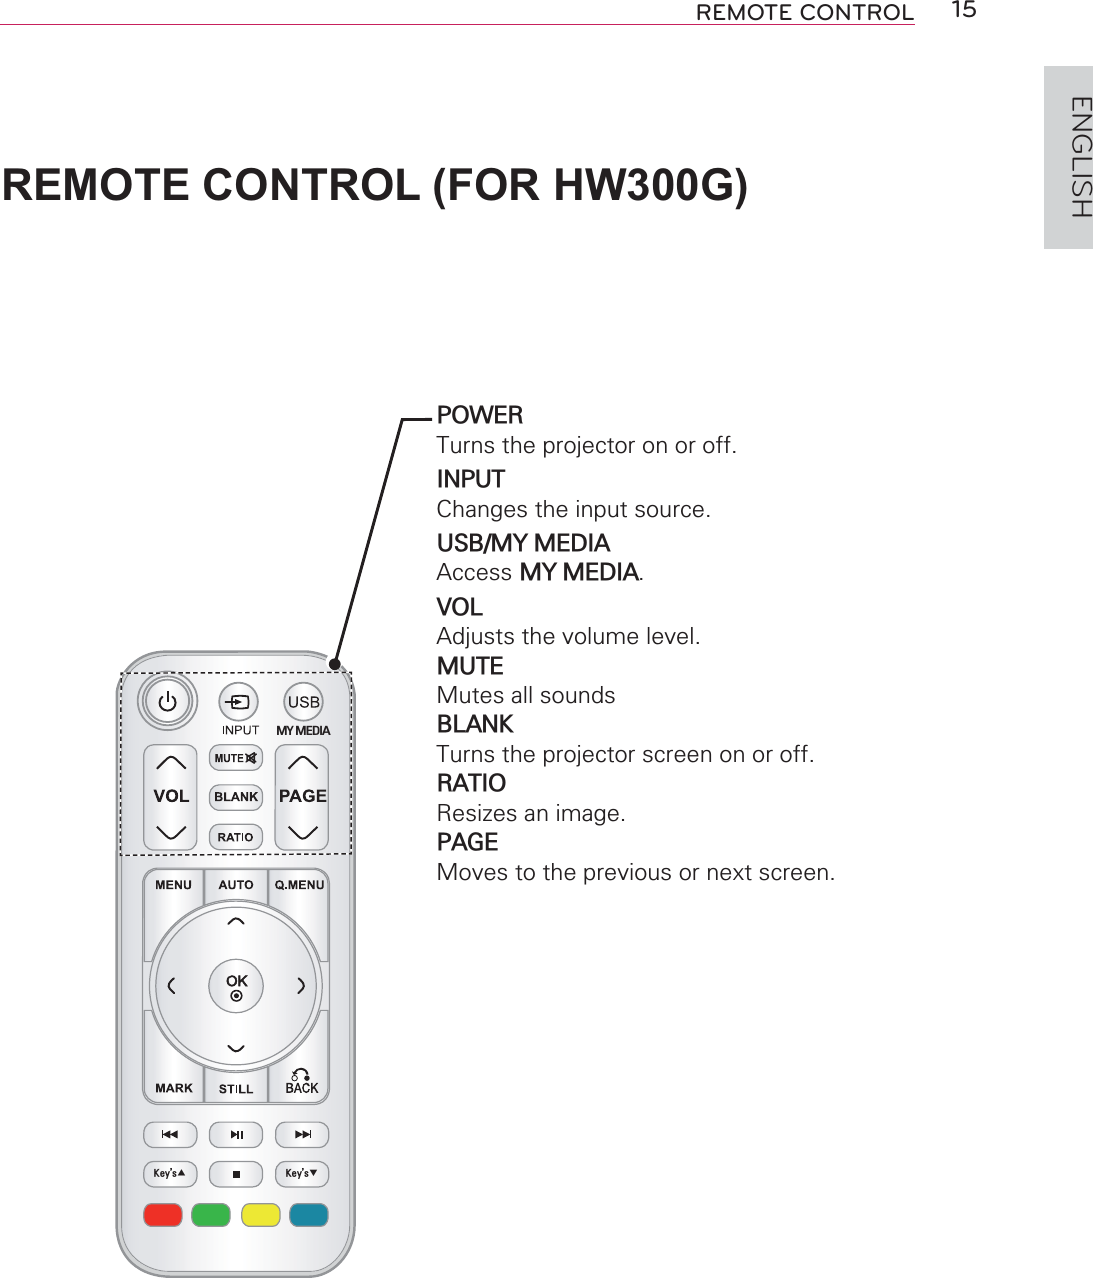 15REMOTE CONTROLENGLISHREMOTE CONTROL (FOR HW300G).H\،Vᯜ .H\،Vᯝ0&lt;0(&apos;,$POWERTurns the projector on or off.INPUTChanges the input source.USB/MY MEDIAAccess MY MEDIA.VOLAdjusts the volume level.MUTEMutes all soundsBLANKTurns the projector screen on or off.RATIOResizes an image.PAGEMoves to the previous or next screen.